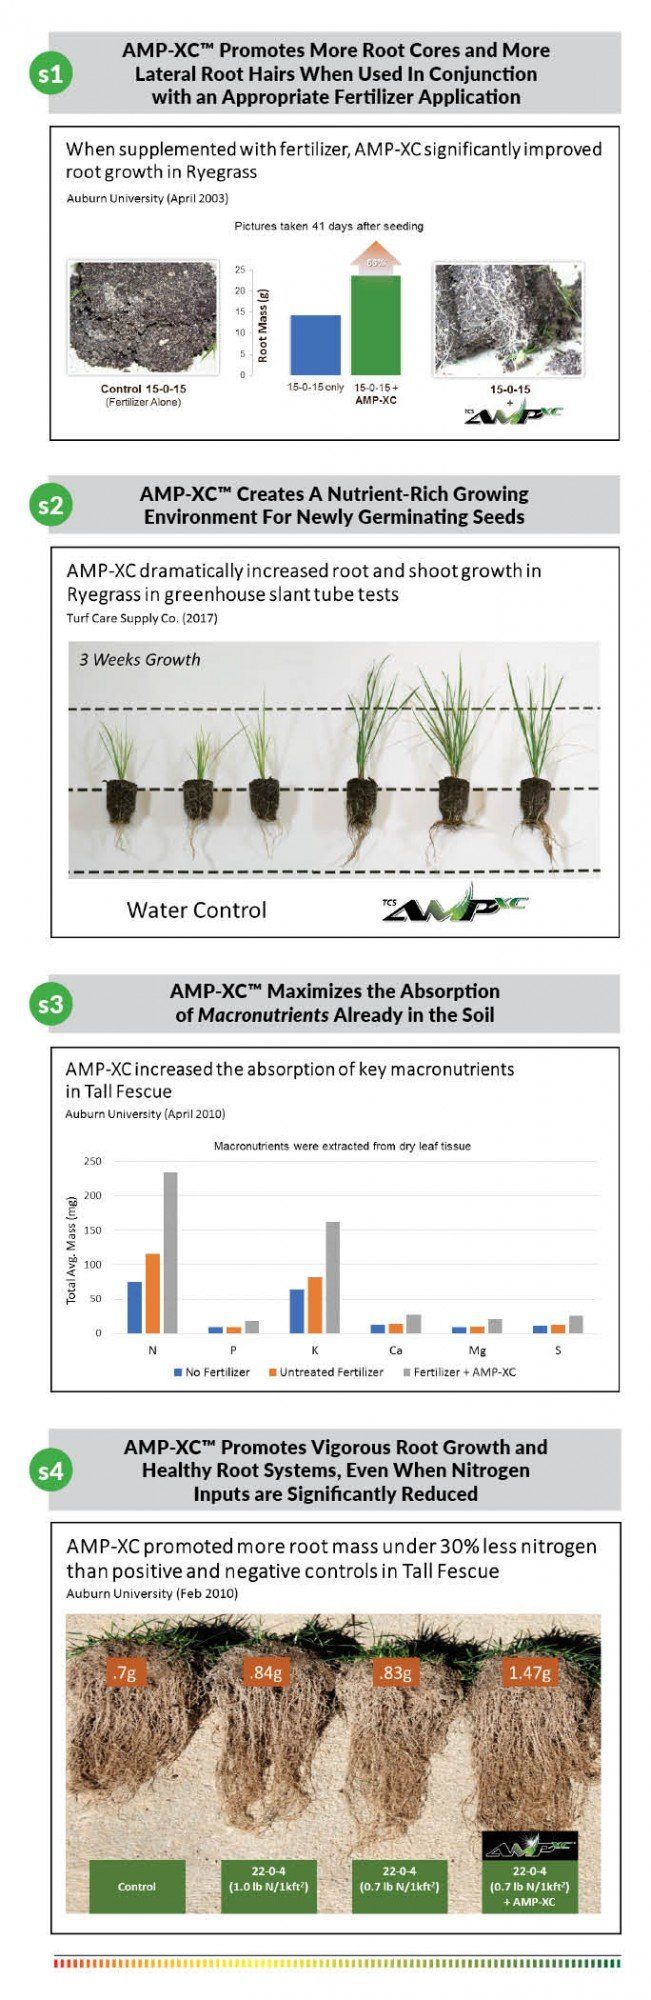 amp xc creates a nutrient rich growing environment for newly germinating seeds chart